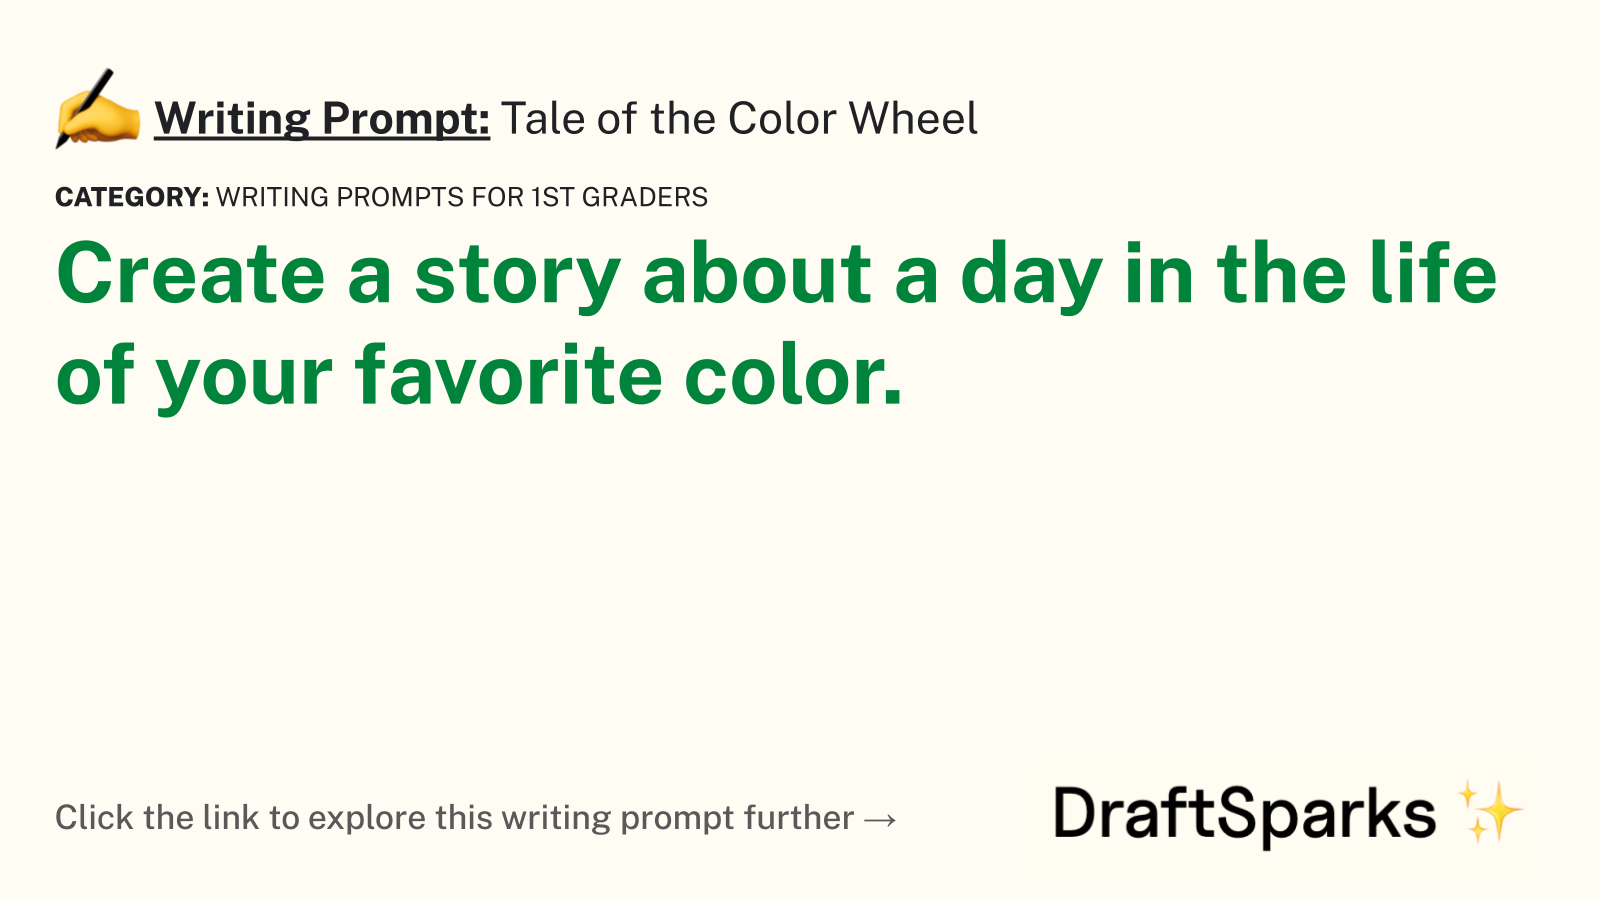 Tale of the Color Wheel